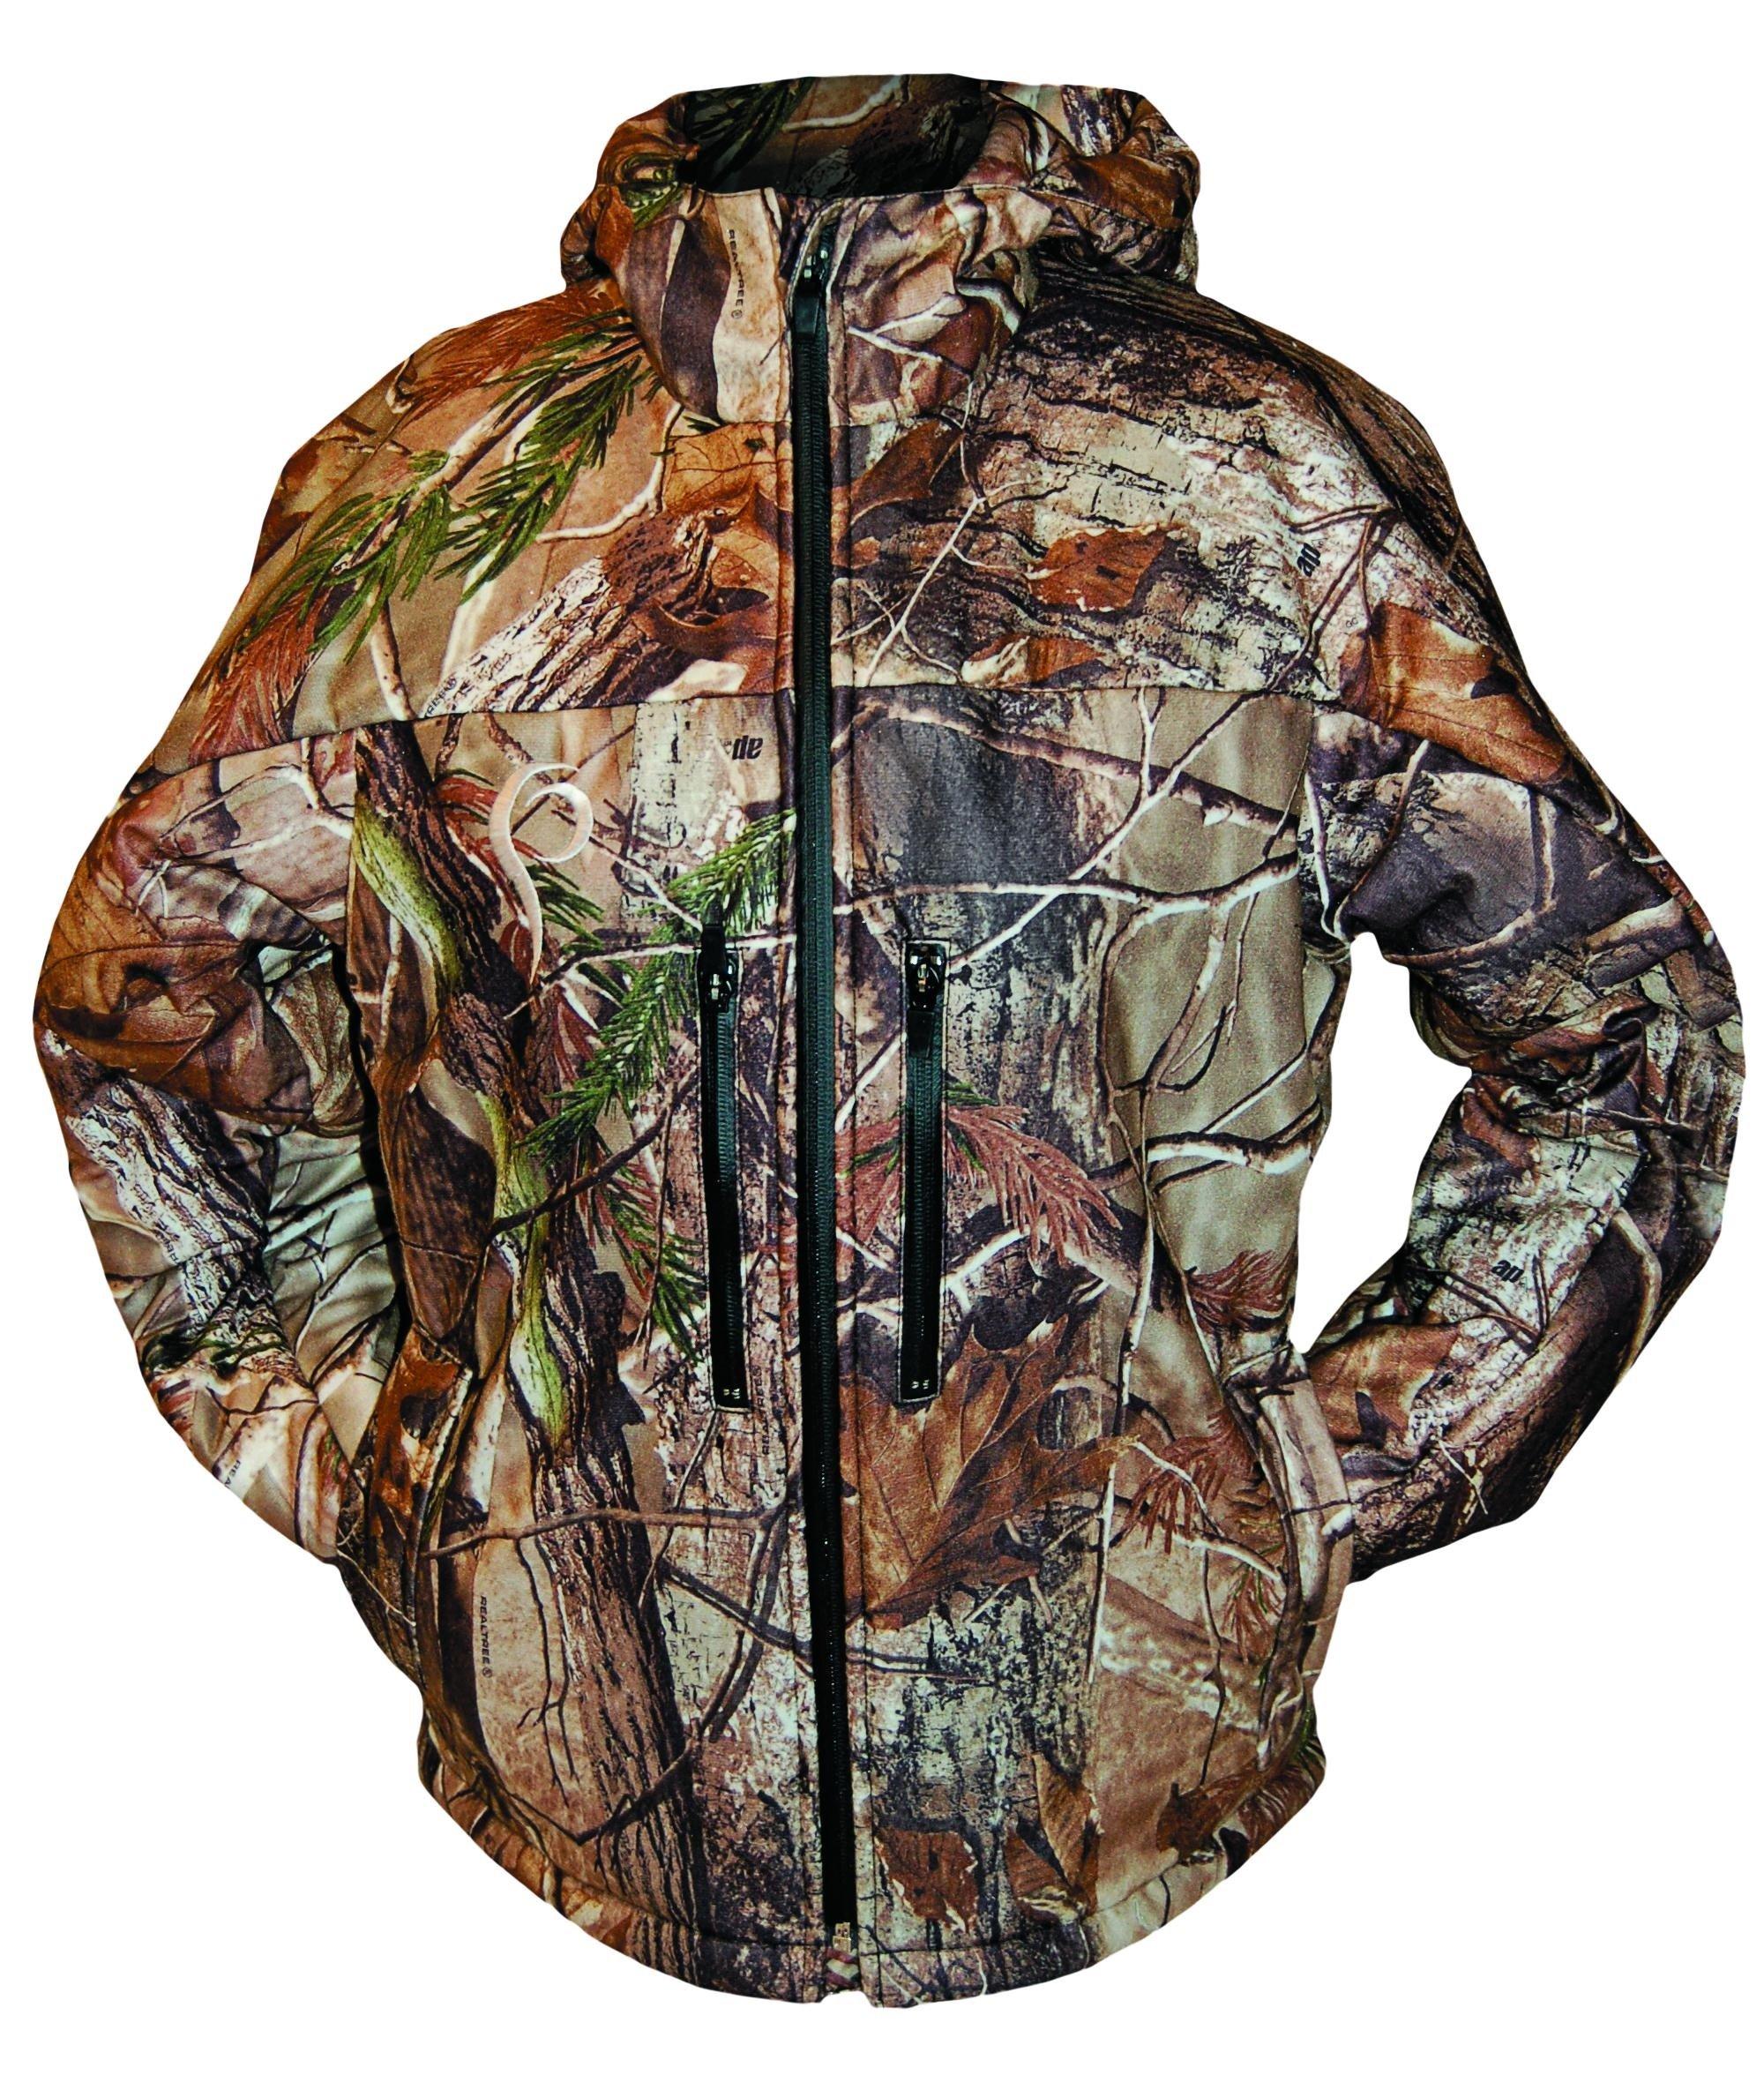 Prois Xtreme Insulated Jacket for Women